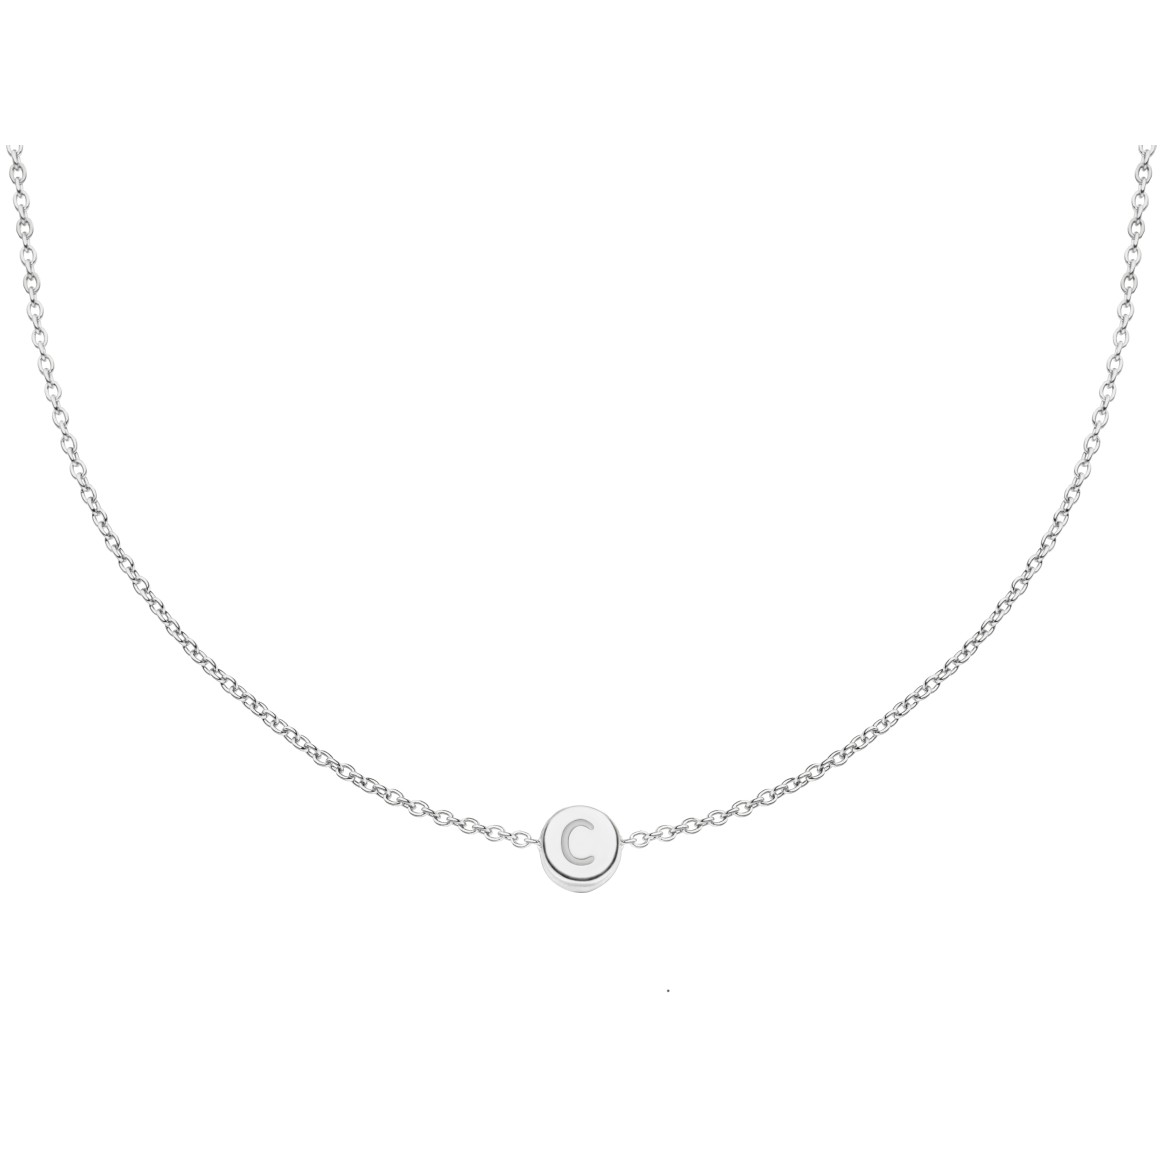 one letter anchor necklace 18 karat white gold